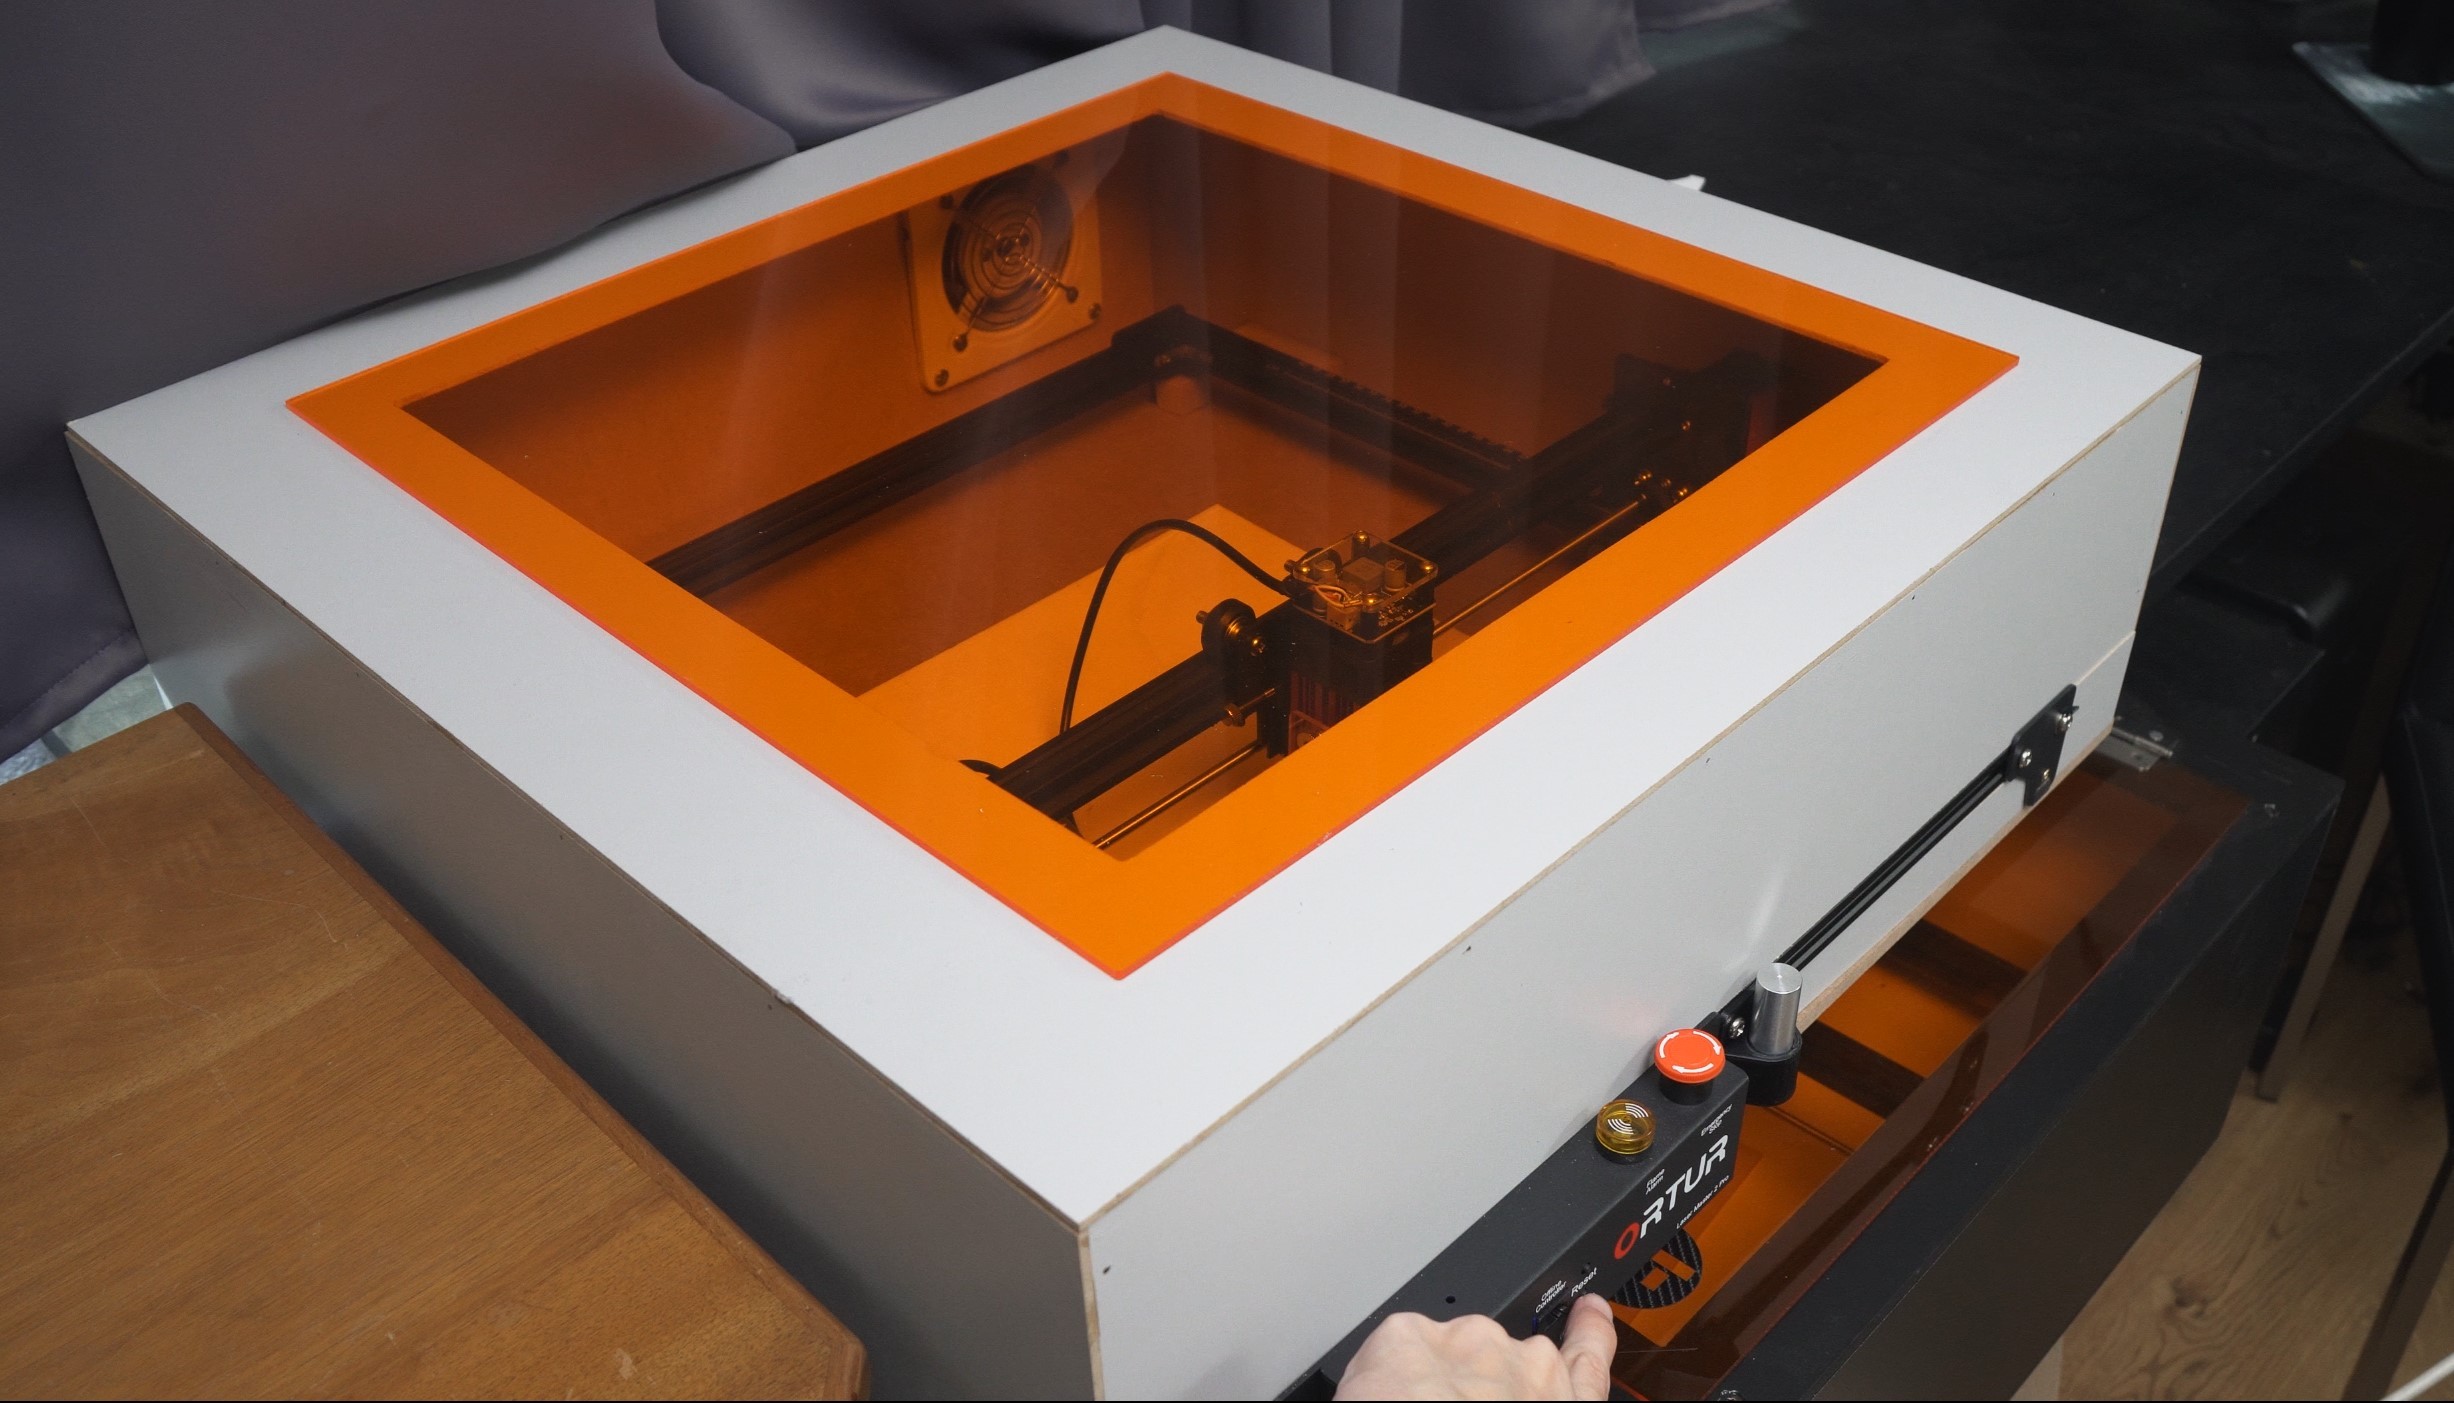 Longer RAY5 Laser Engraver Enclosure with Exhaust Fan & Pipe Fireproof Cover